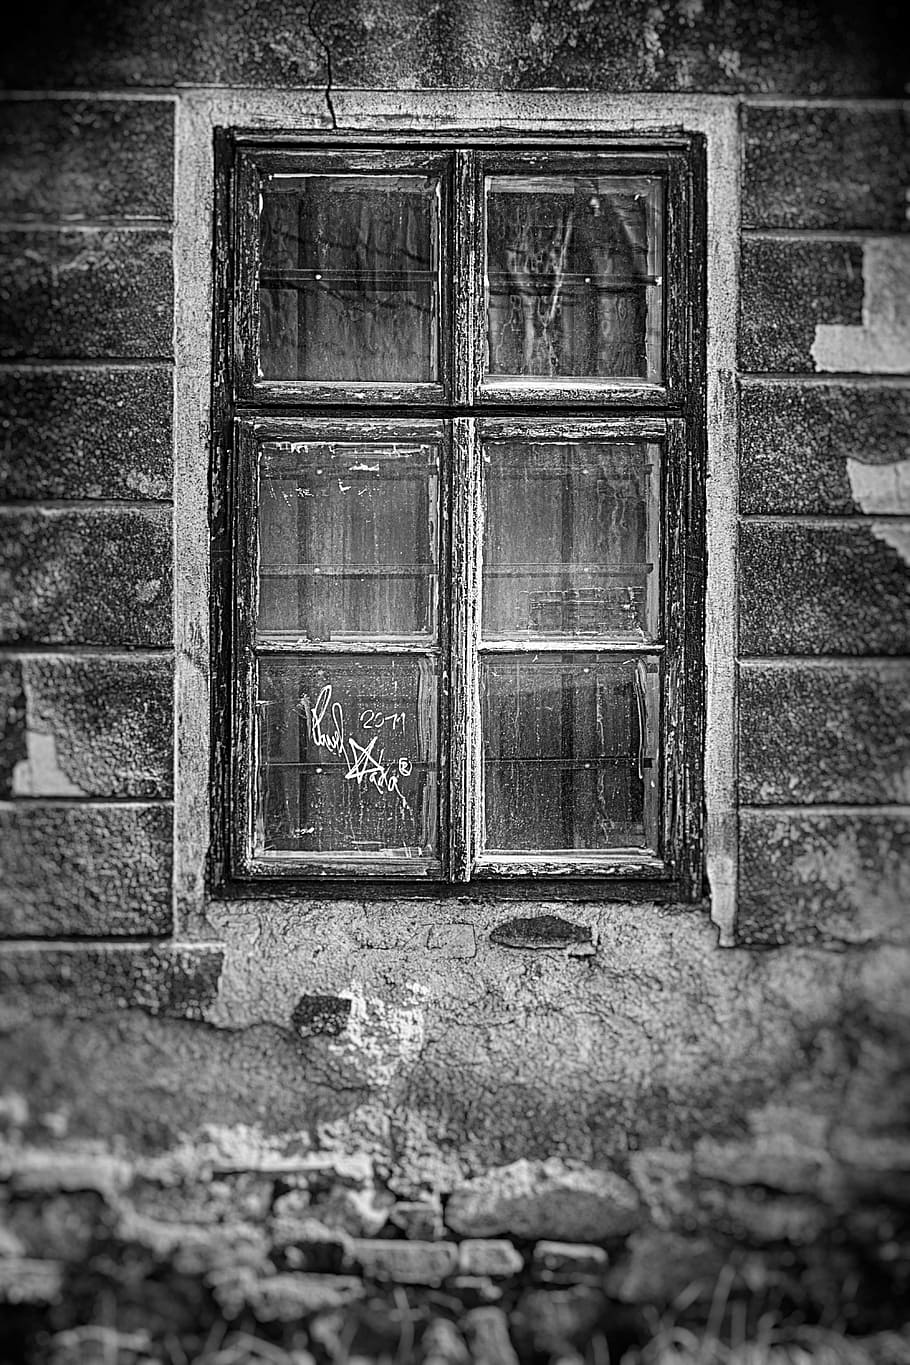 grid, grate, prison, vanished time, architecture, old house, background, wallpaper, window, nostalgia